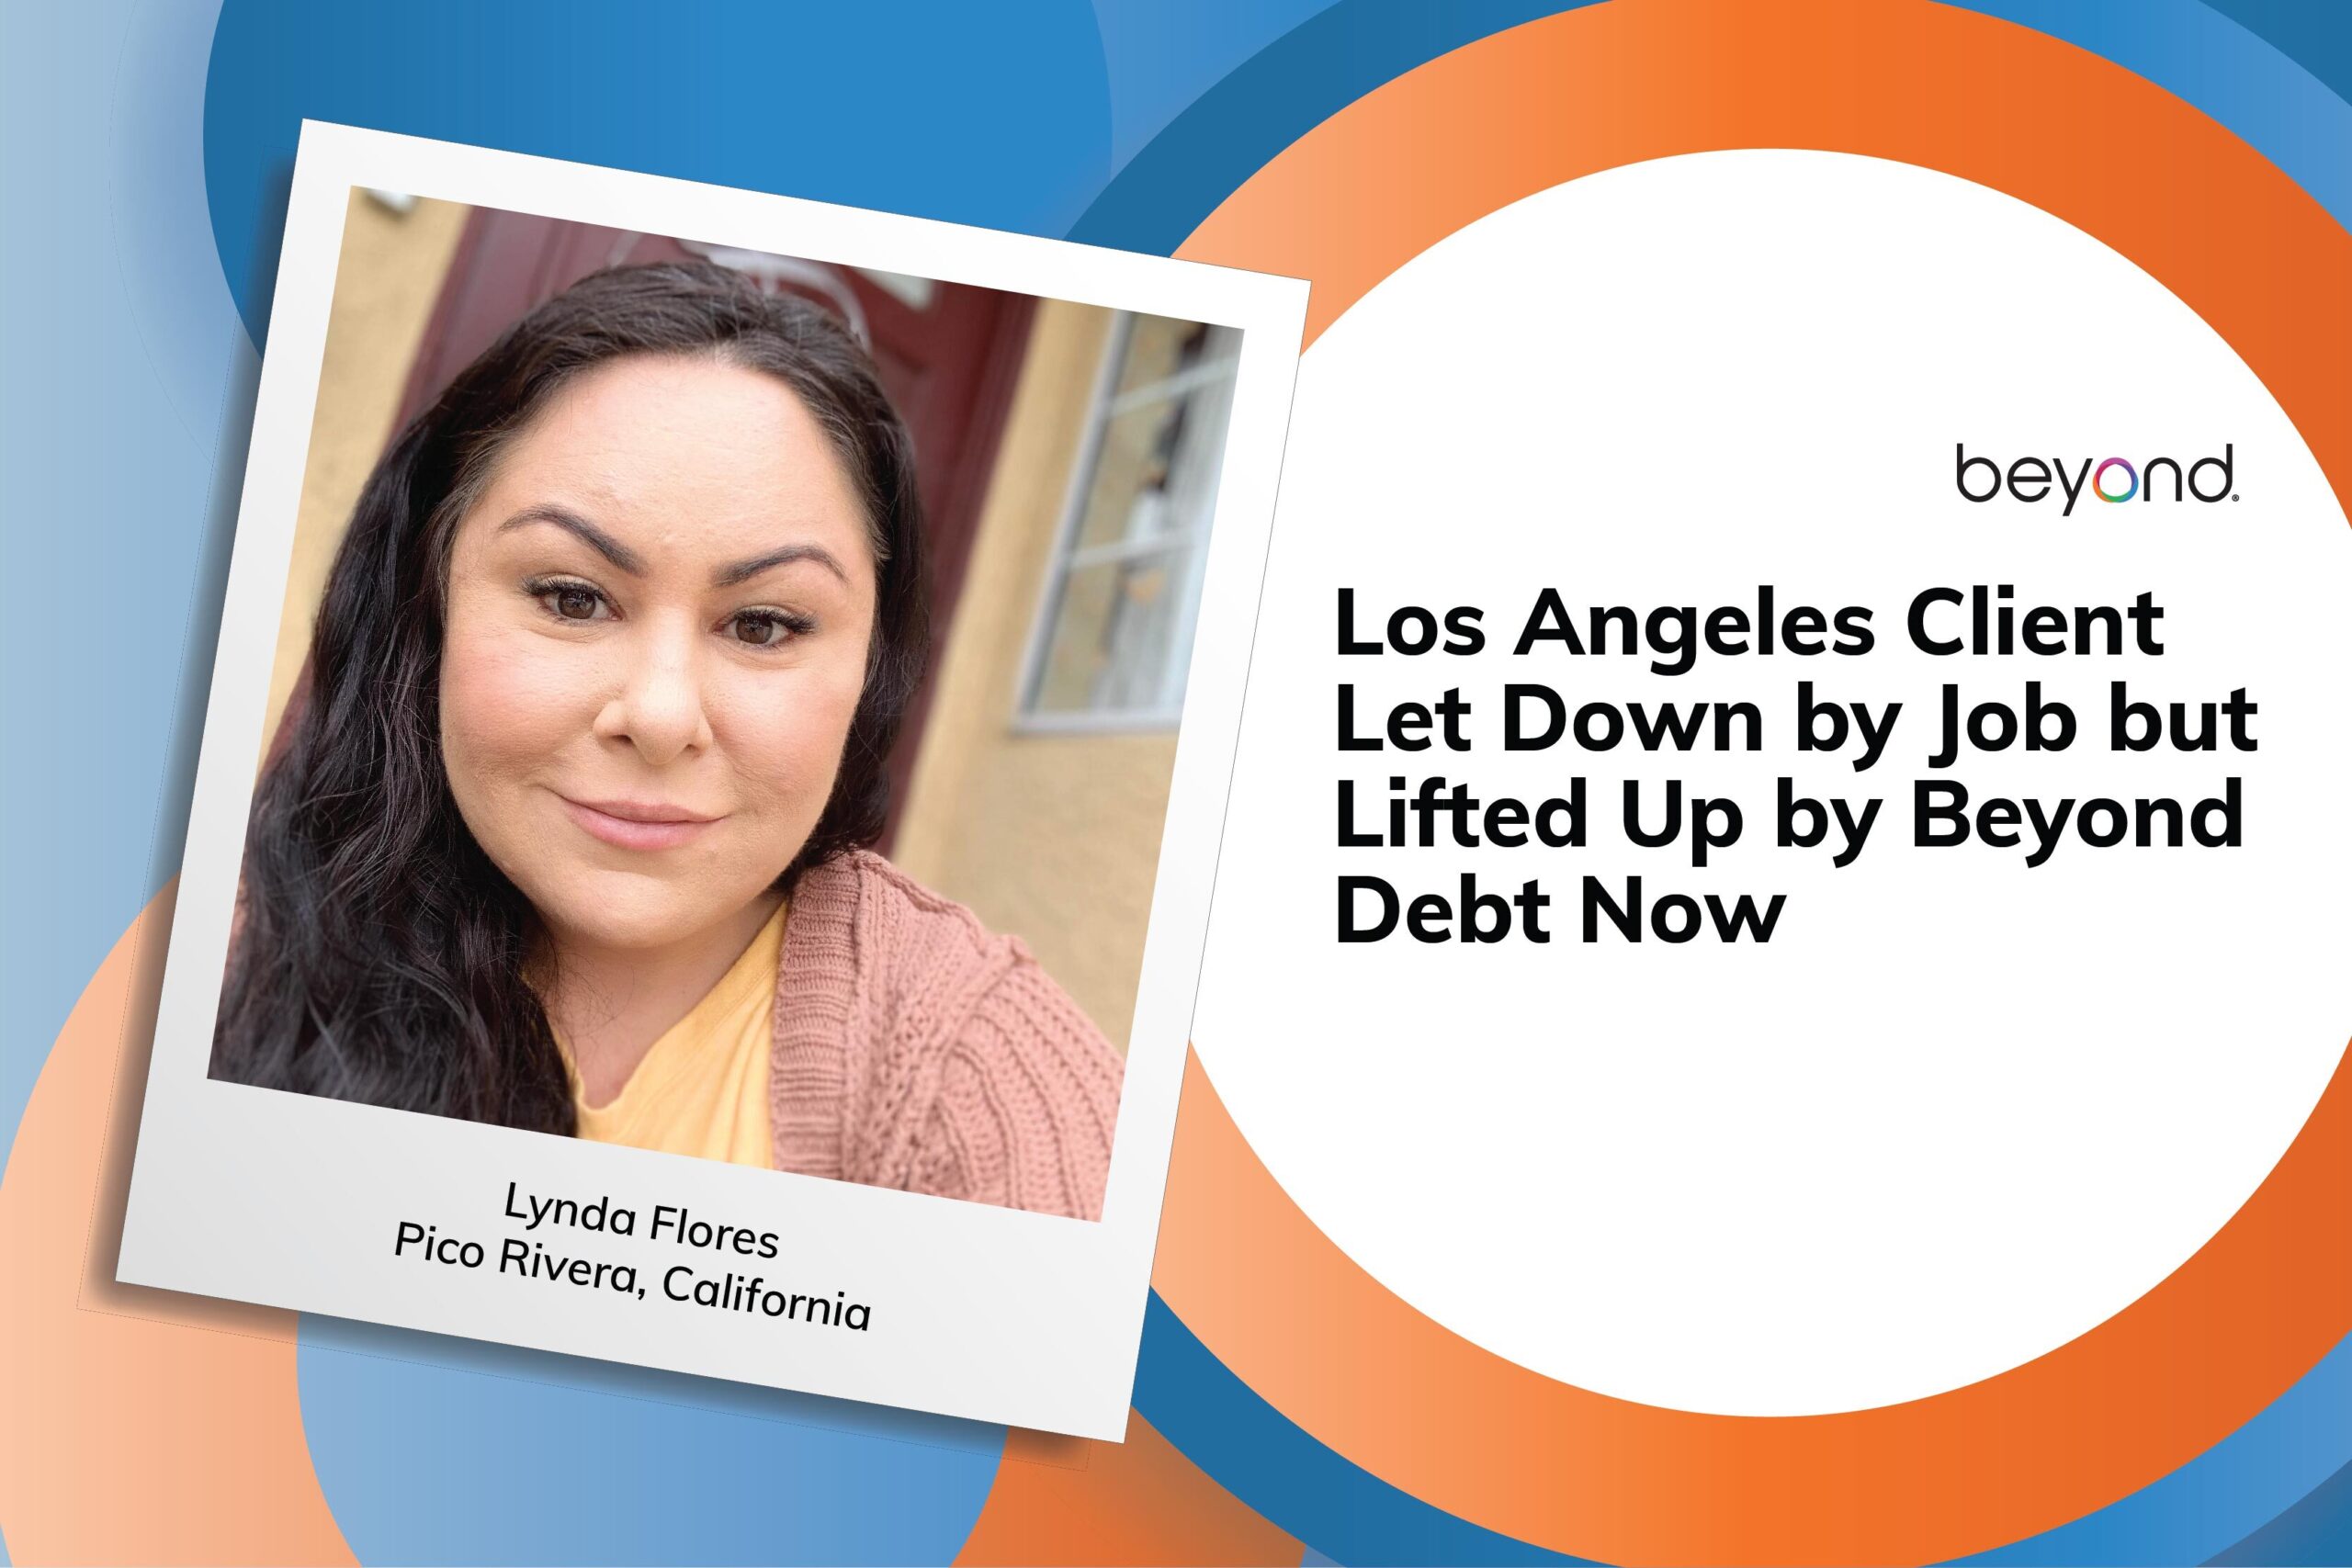 Lynda Flores is the latest recipient of Beyond Debt Now